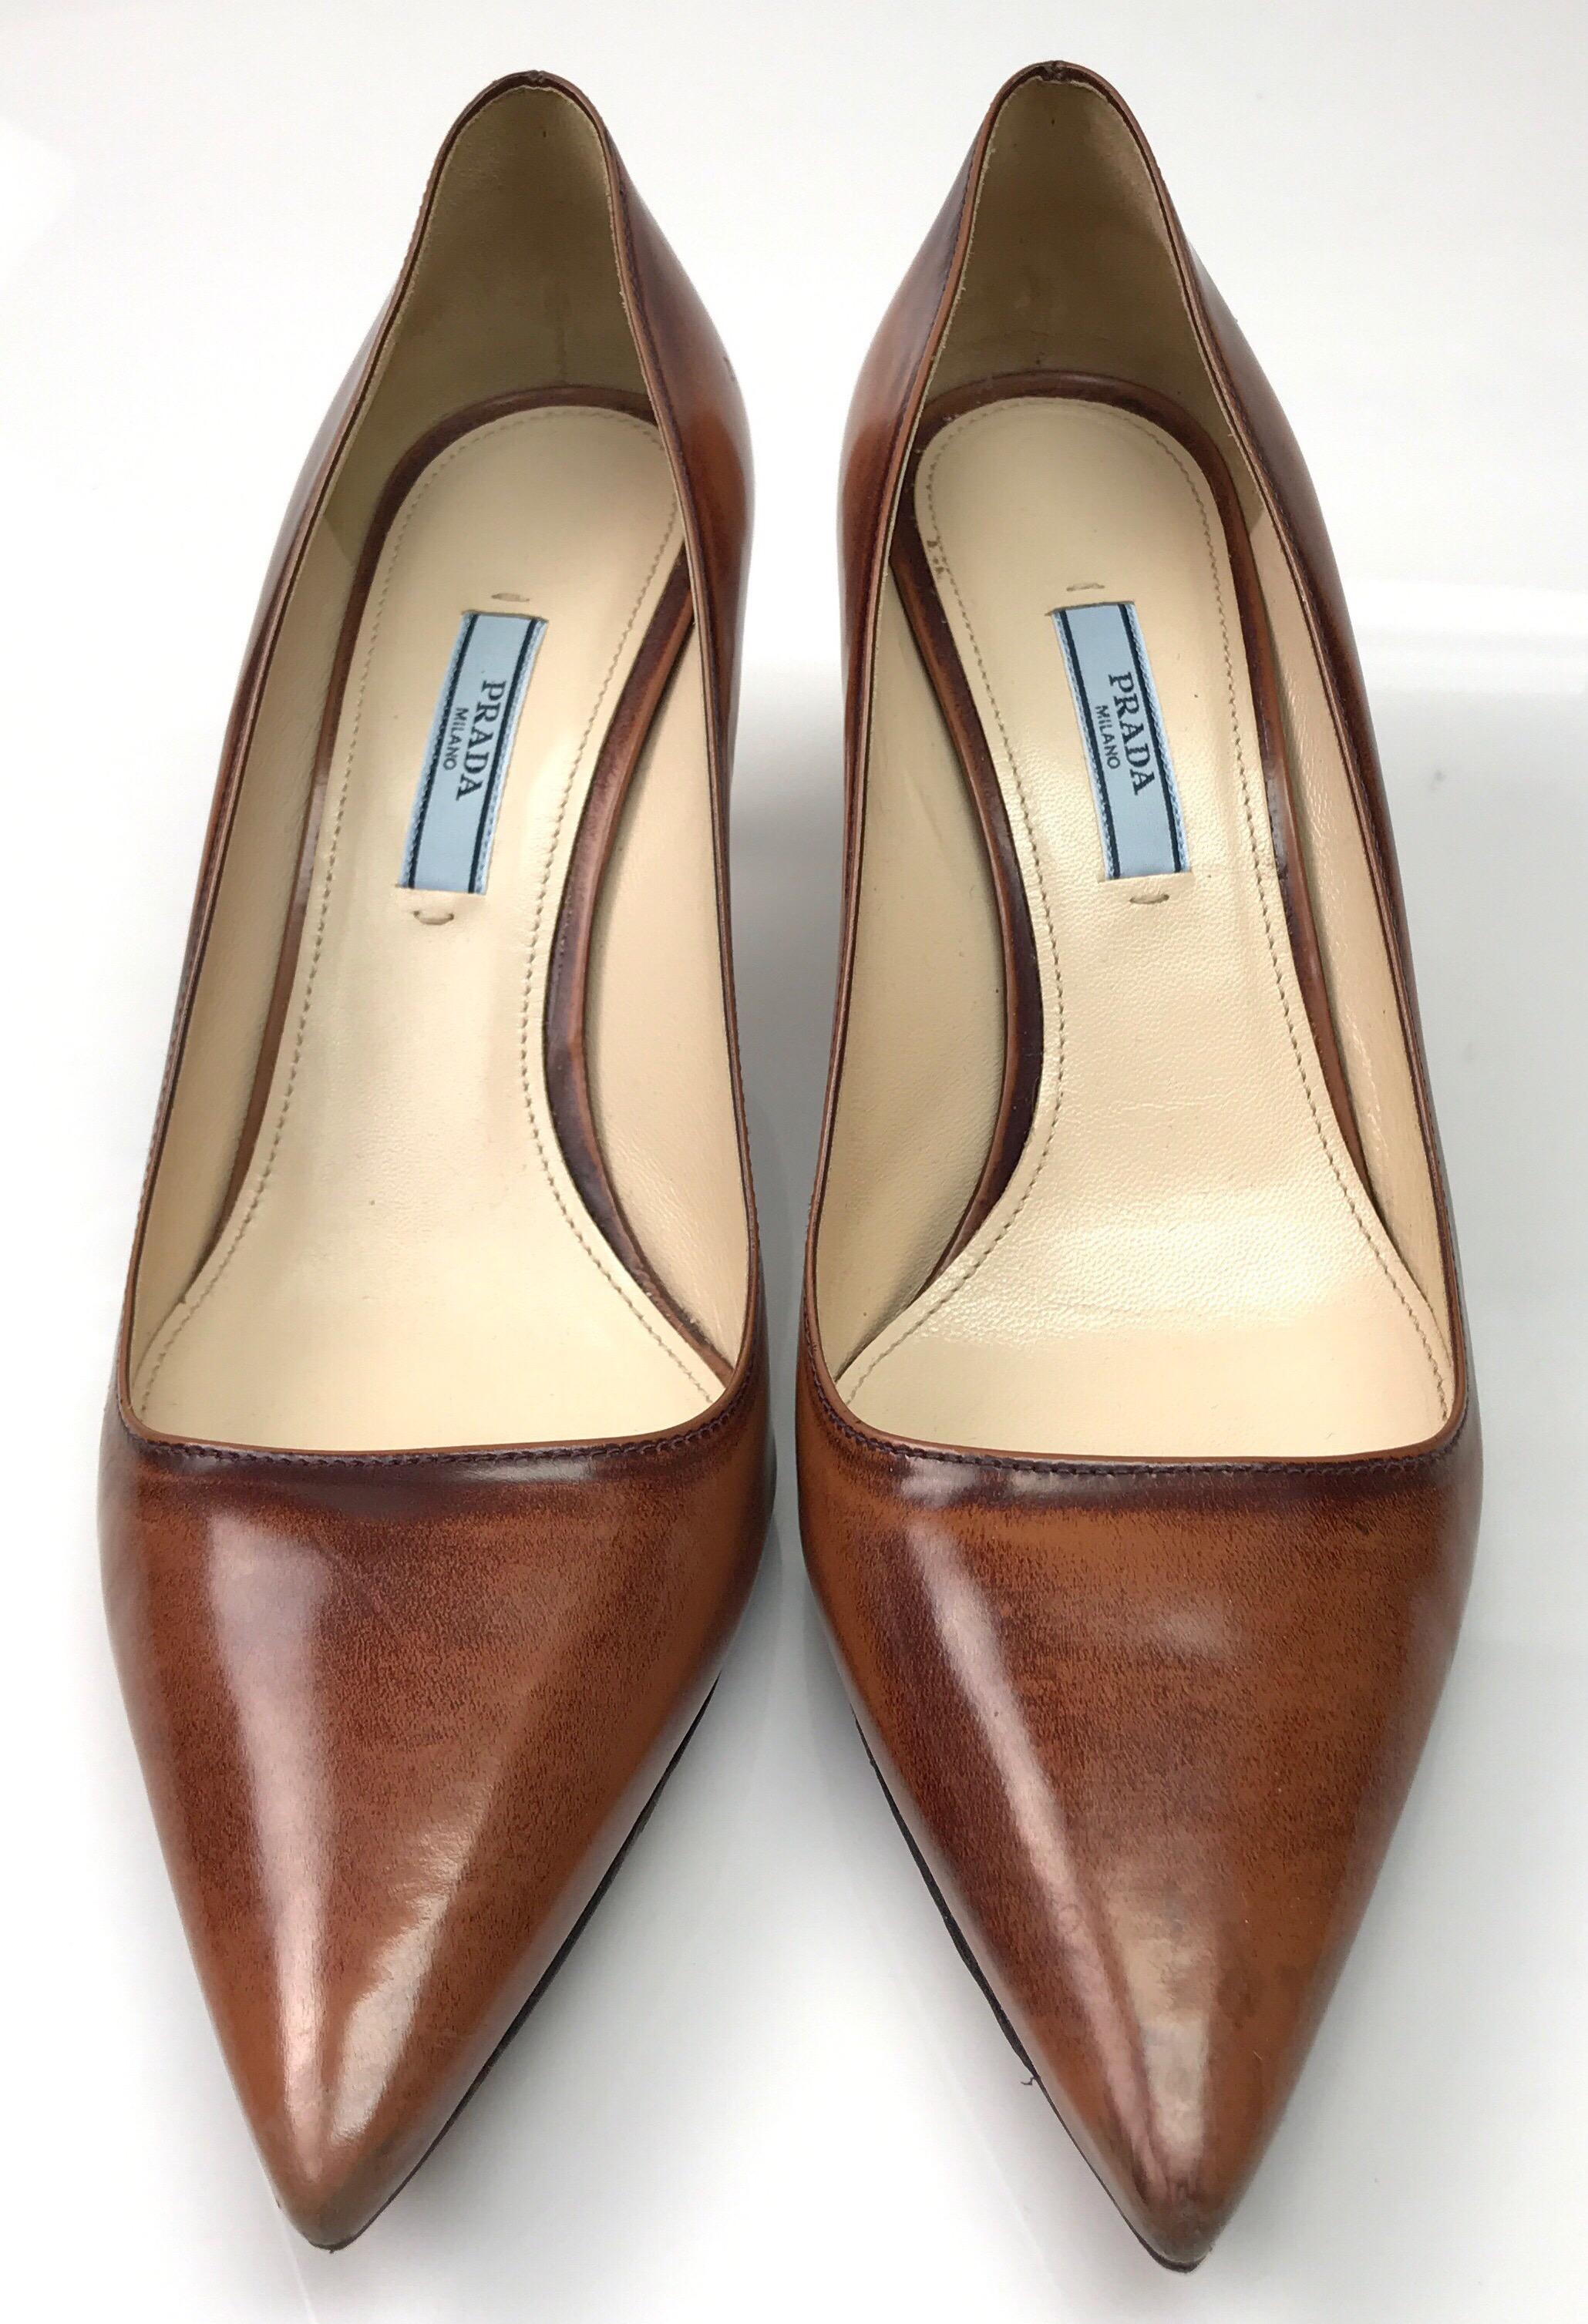 PRADA Brown Unfinished Patent Pointed Toe Heel - 41. This beautiful Prada heel is in excellent condition, only showing sign of use on the bottom of the shoe. It is brown patent leather with an unfinished look. It has a pointed toe and the inside is